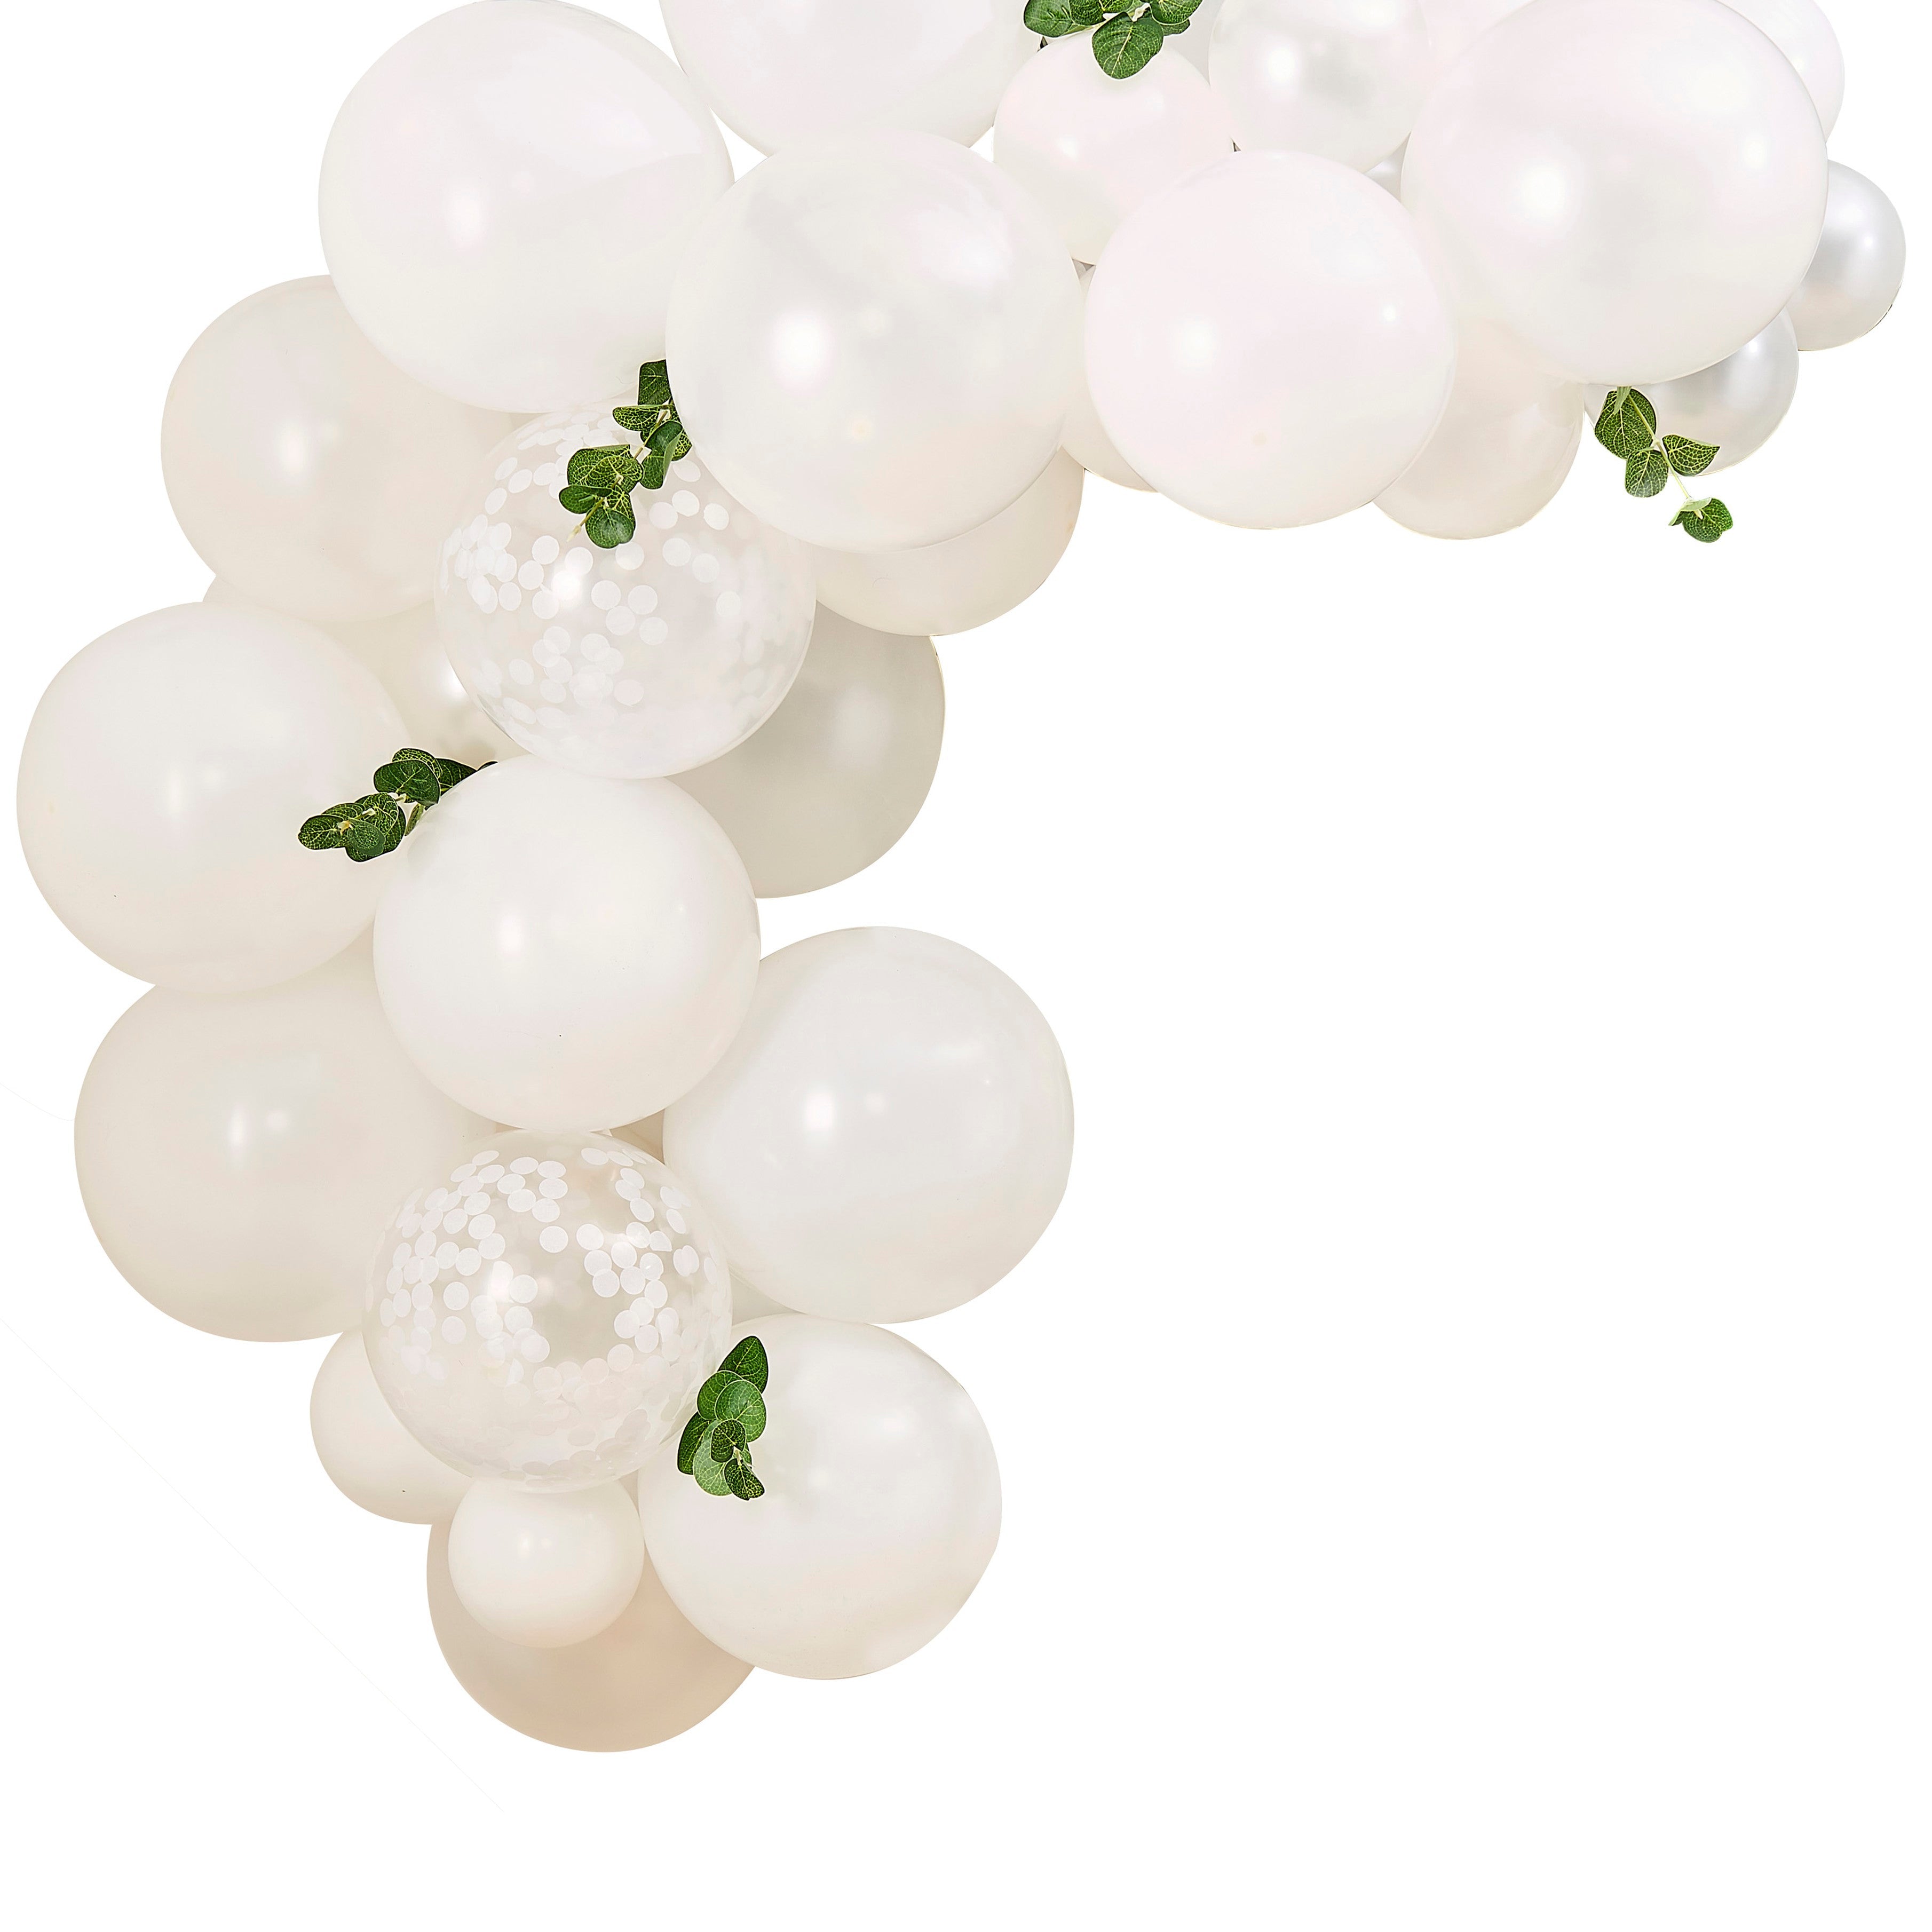 White balloon garland Balloon Arch With Foliage Party Love